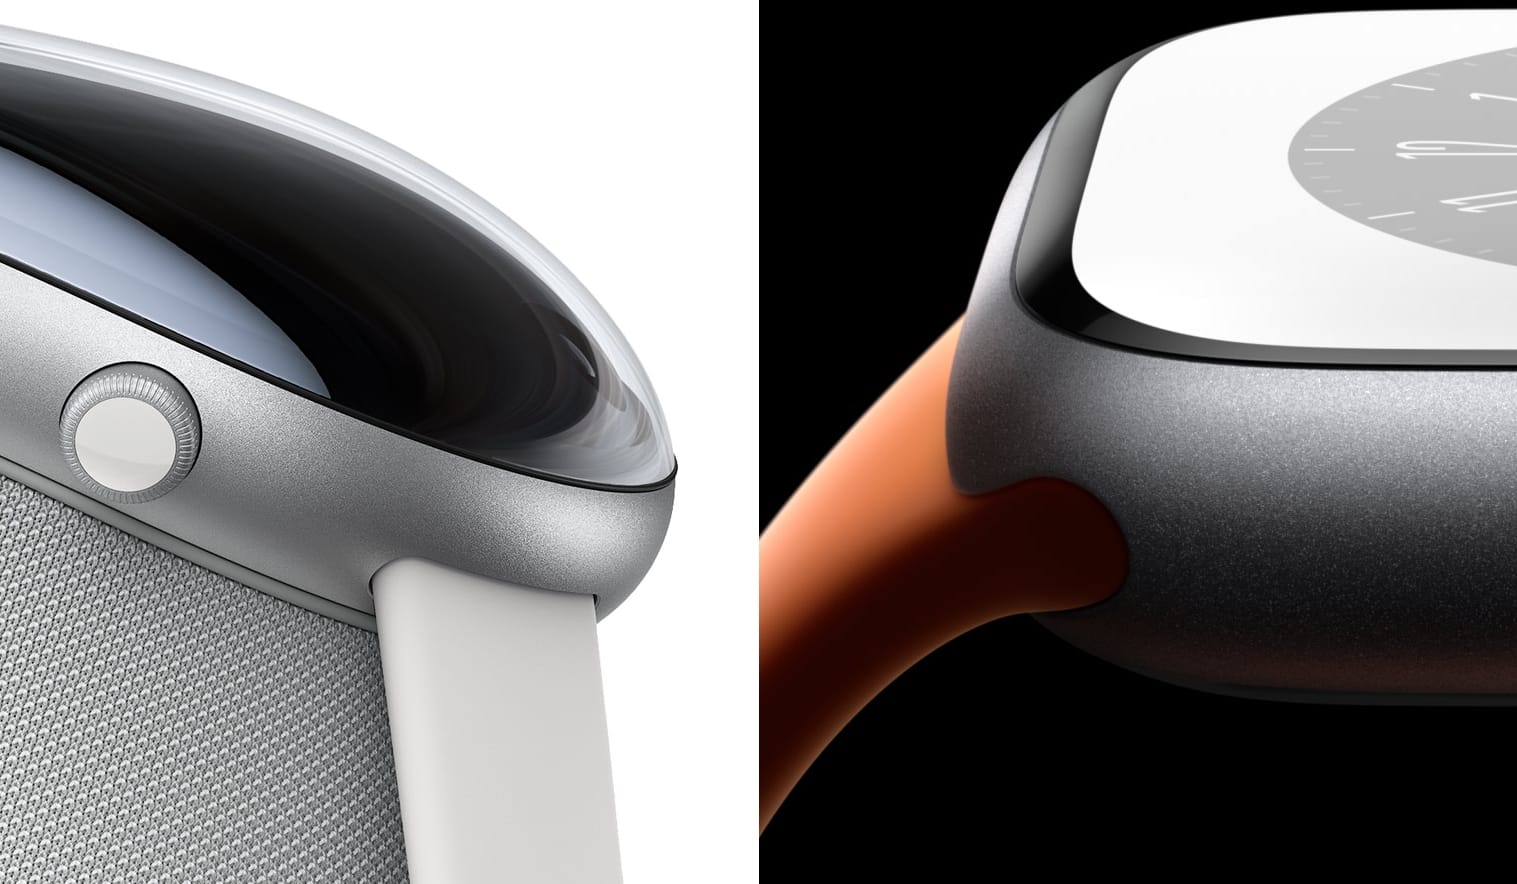 A composite screenshot of the Vision Pro and Apple Watch, showing how the curved glass bending smoothly into the metallic casing is shared on both products